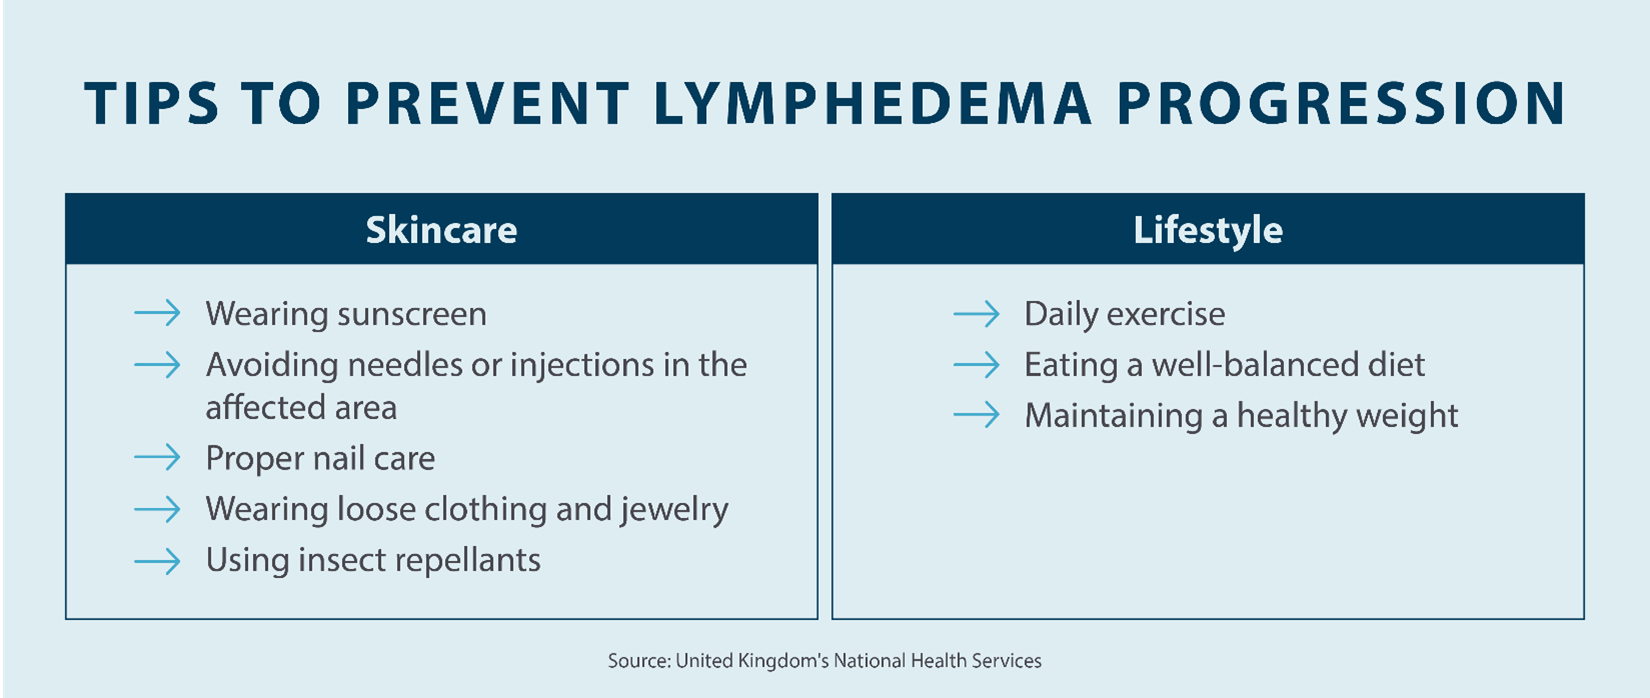 tips to prevent lymphedema progression, skincare and lifestyle tips